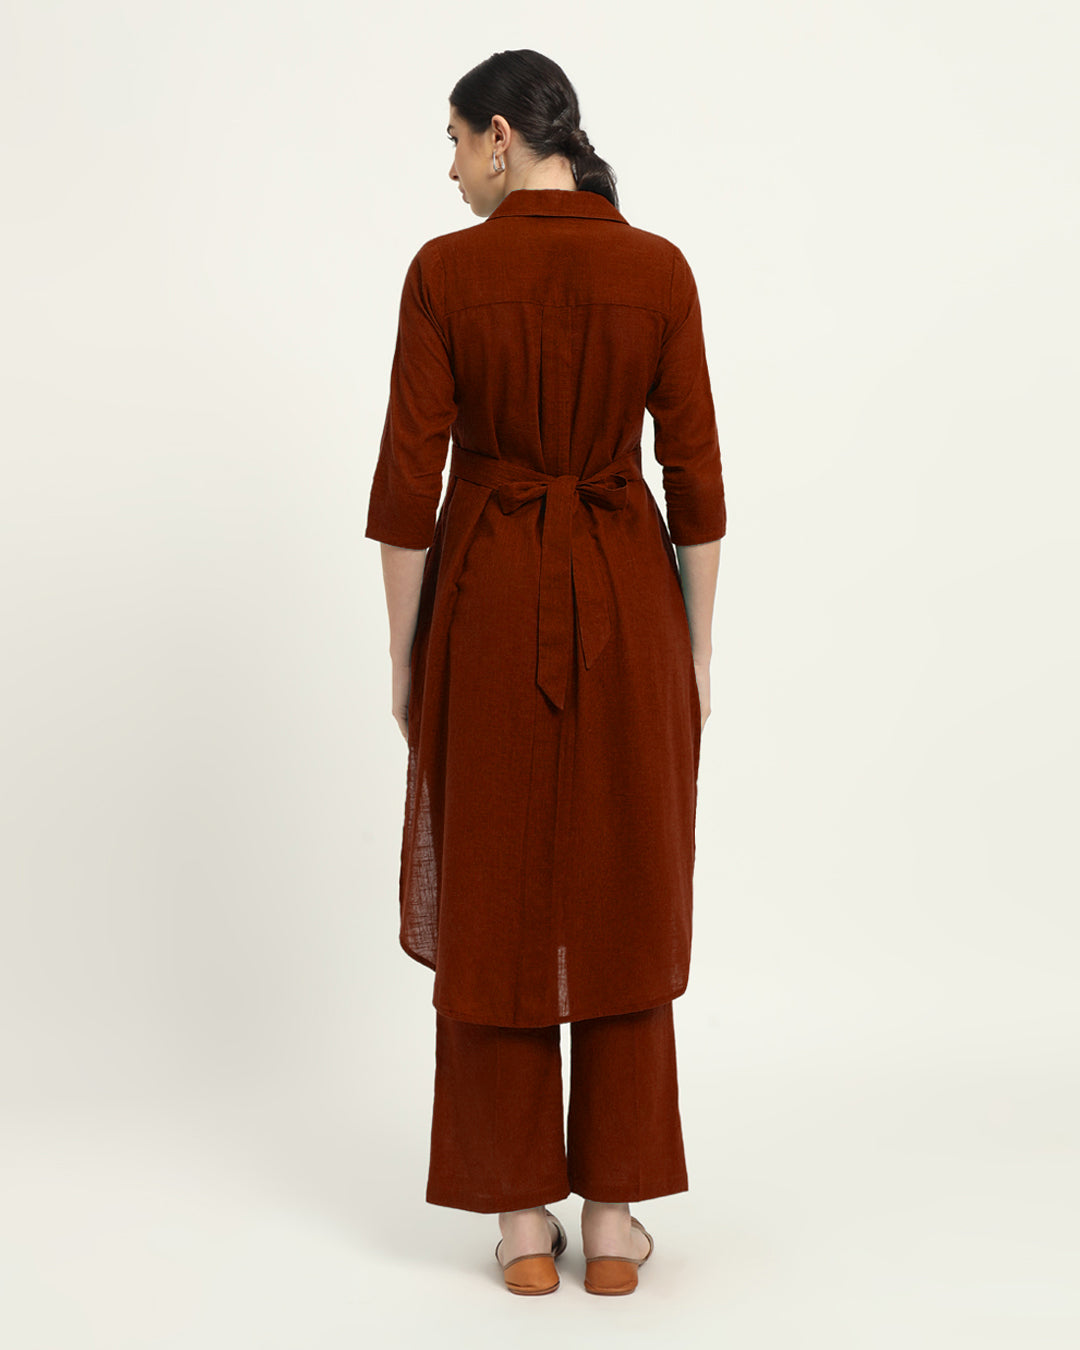 Combo: Iced Grey & Russet Red Bellisimo Belted Solid Kurta